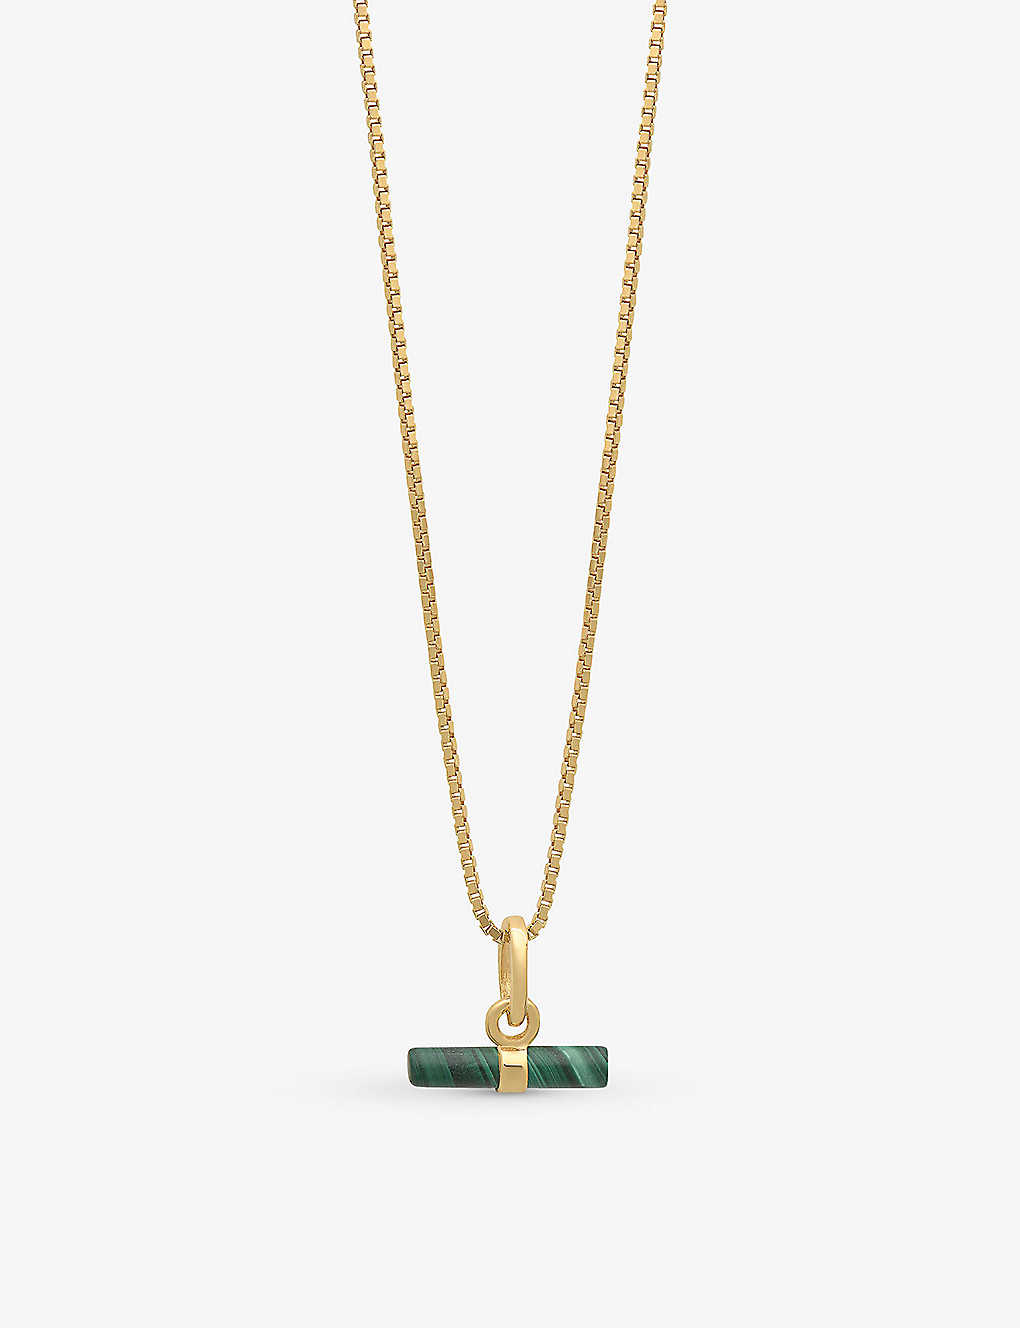 Rachel Jackson Mini T-bar 22ct Gold-plated Sterling Silver And Malachite Necklace In 22 Carat Gold Plated